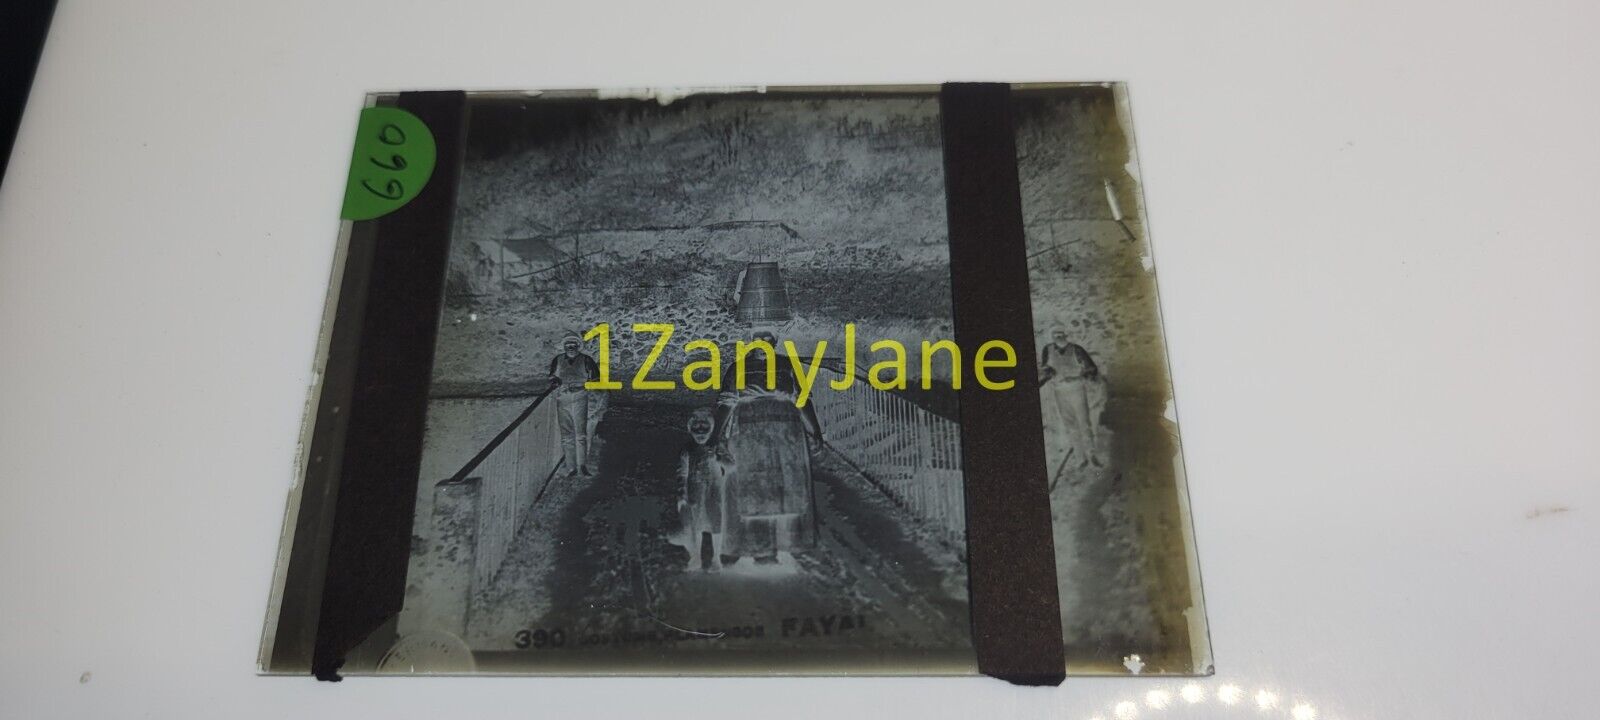 G60 GLASS Slide or Negative MAN WOMAN AND STANDING ON BRIDGE